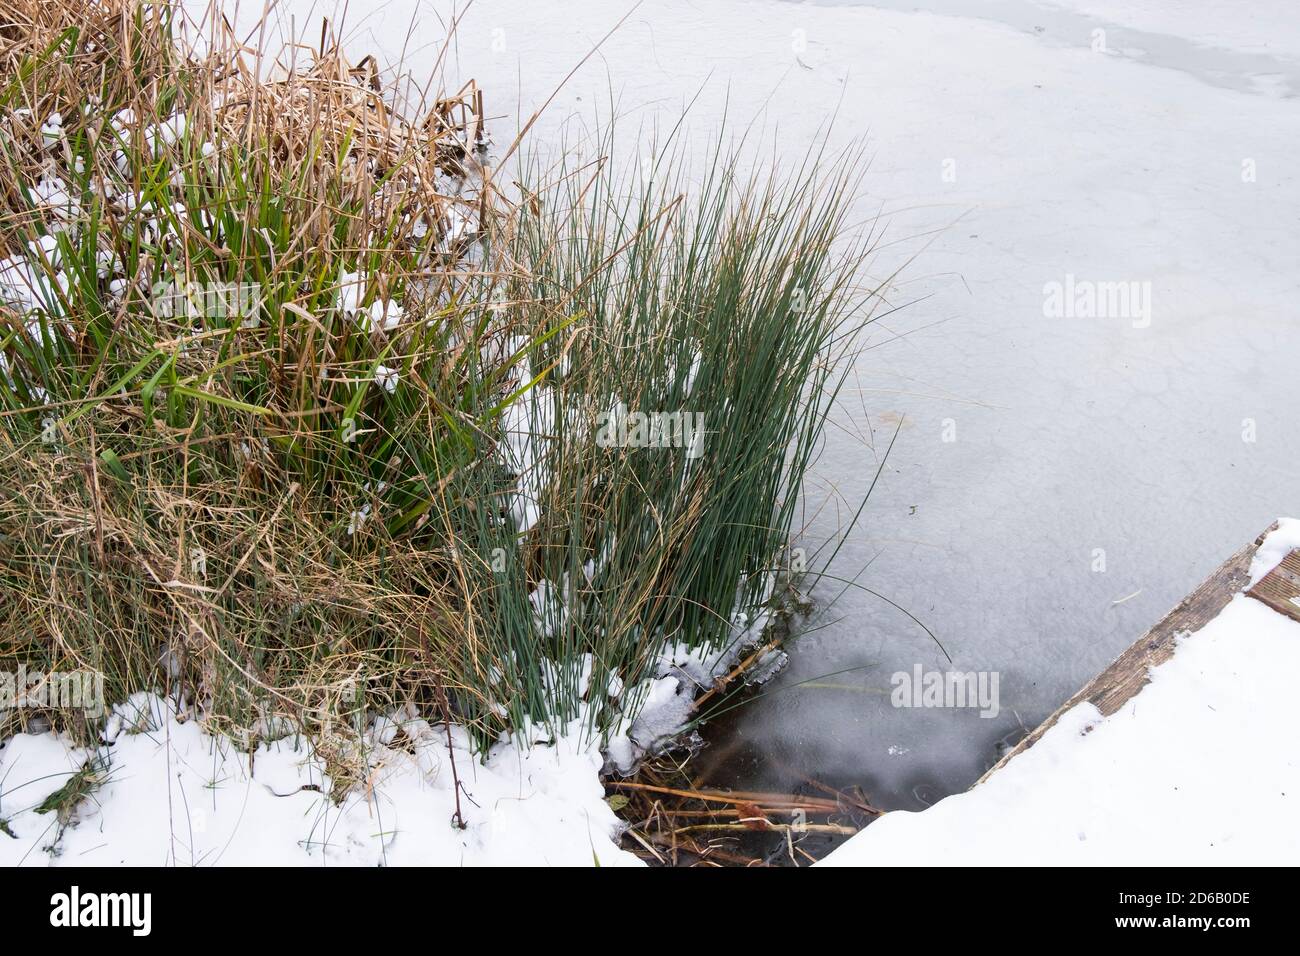 Frozen reeds in a pond Stock Photo